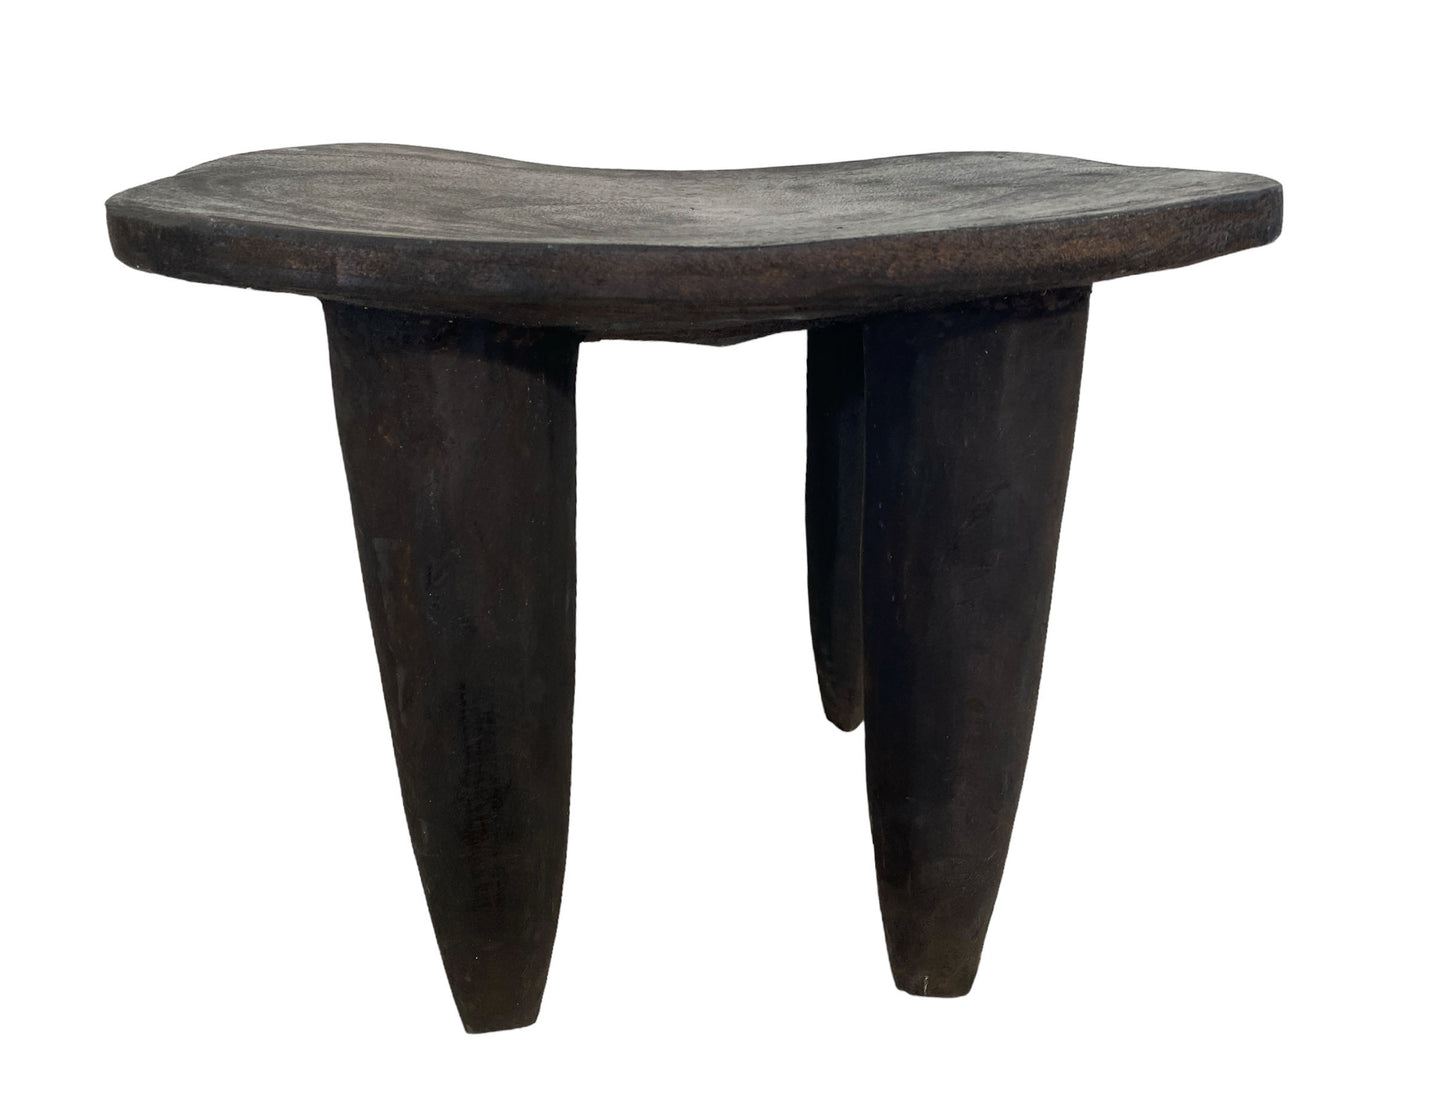 # 5905 African Carved Wood Senufo Table/Stool 20" W